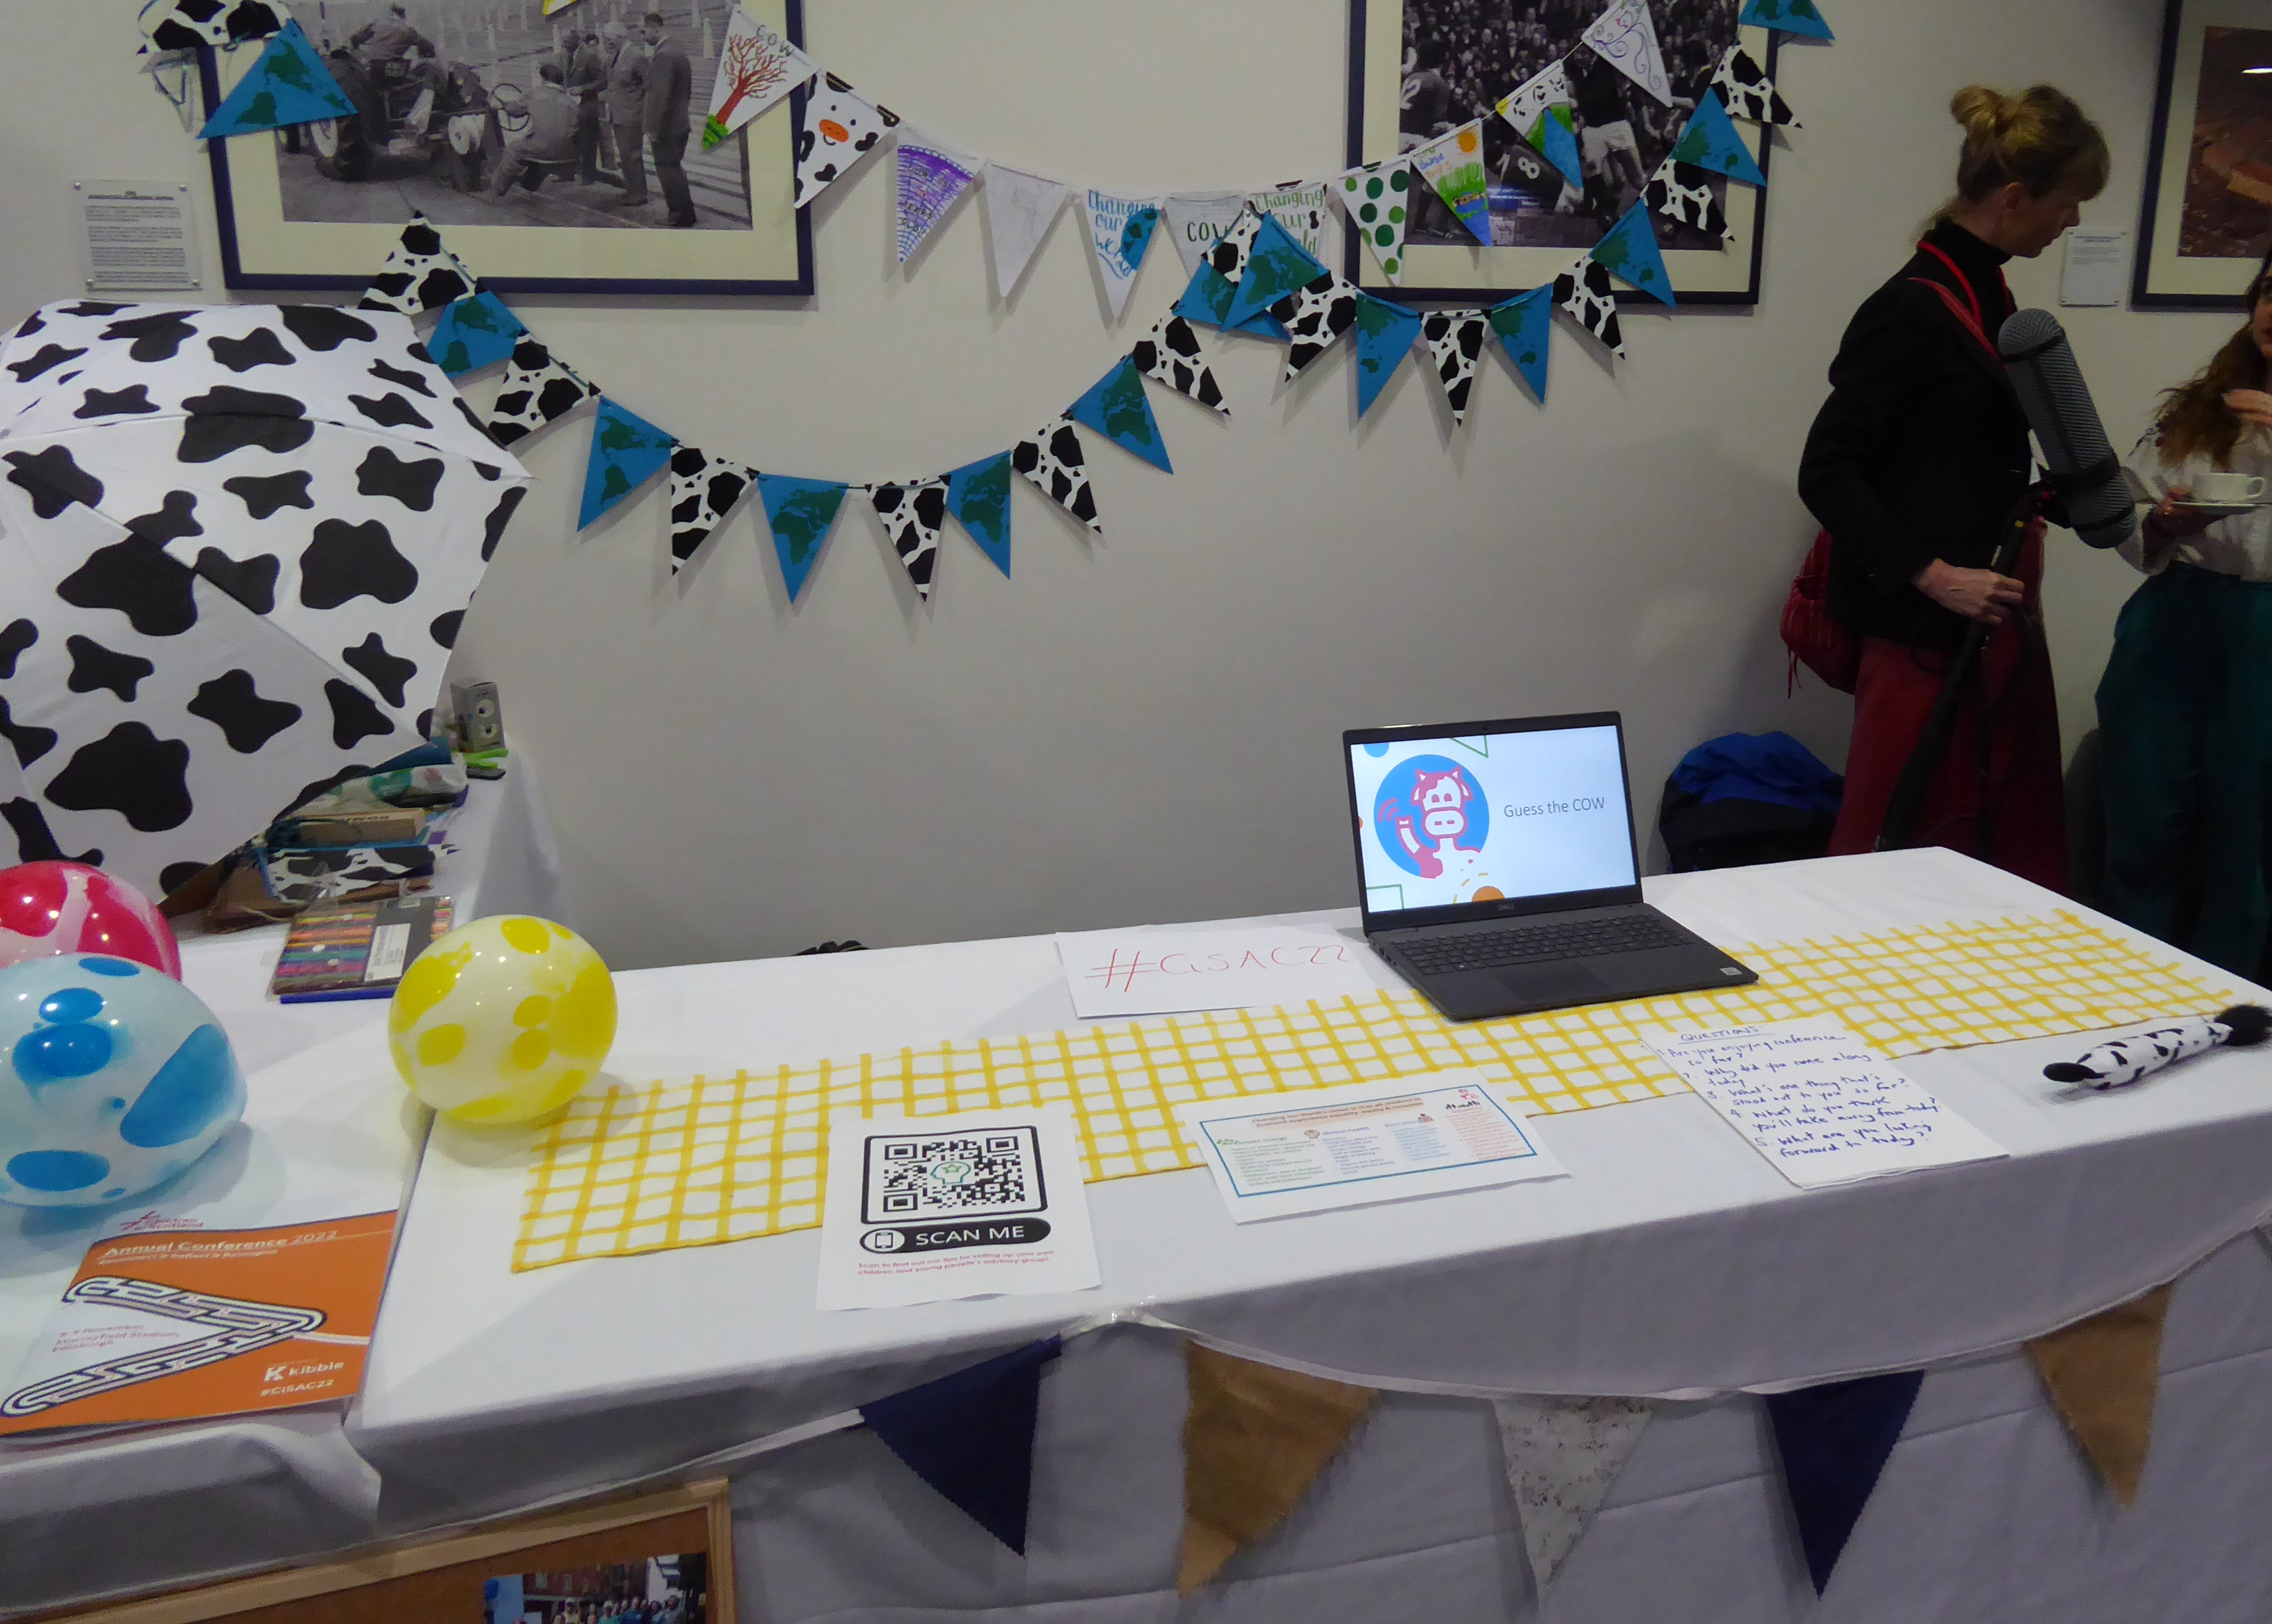 A table with a laptop open with 'Guess the cow' on it. On the table is an inflatable globe and a cow-print umbrella. There is cow-print bunting on the wall behind.